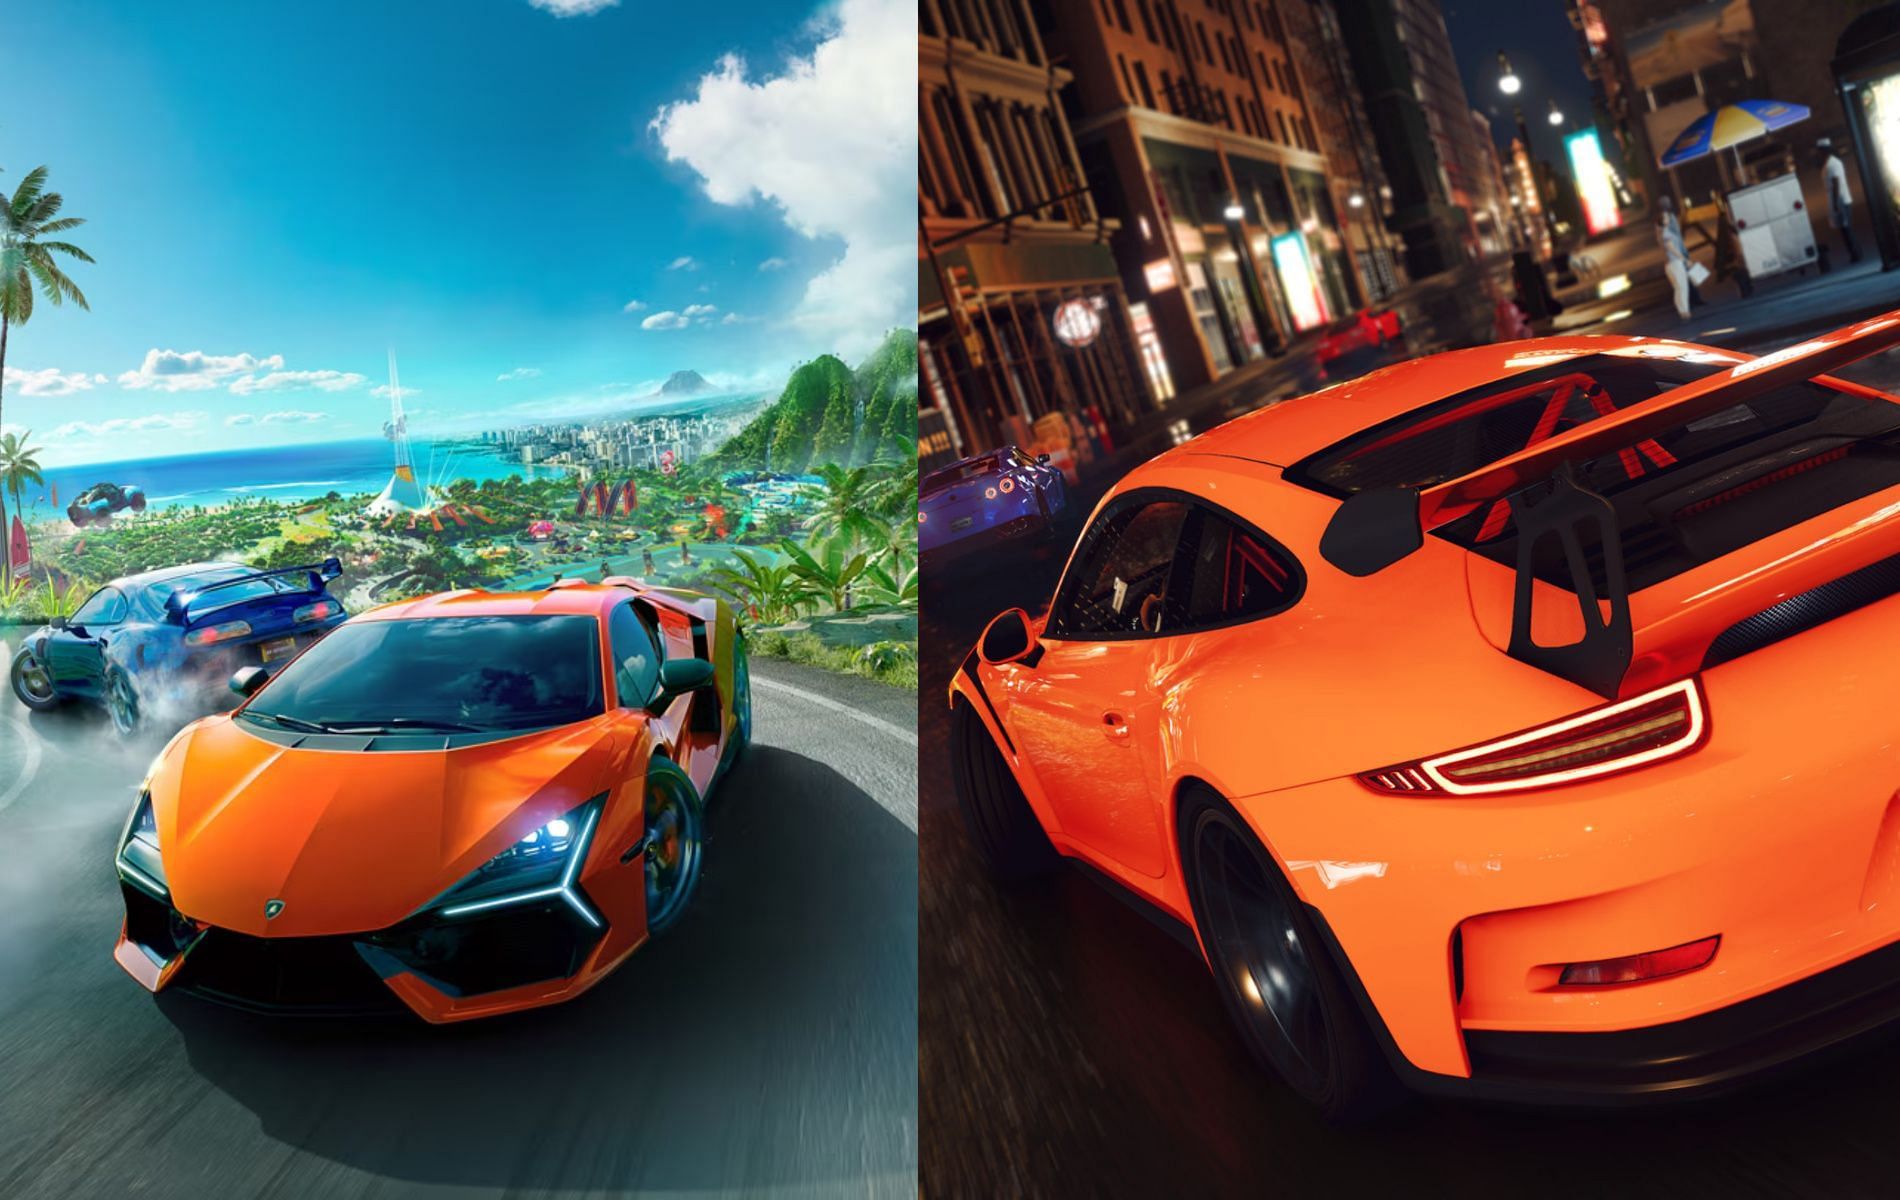 Official art and promotional screenshot for The Crew Motorfest and The Crew 2 respectively